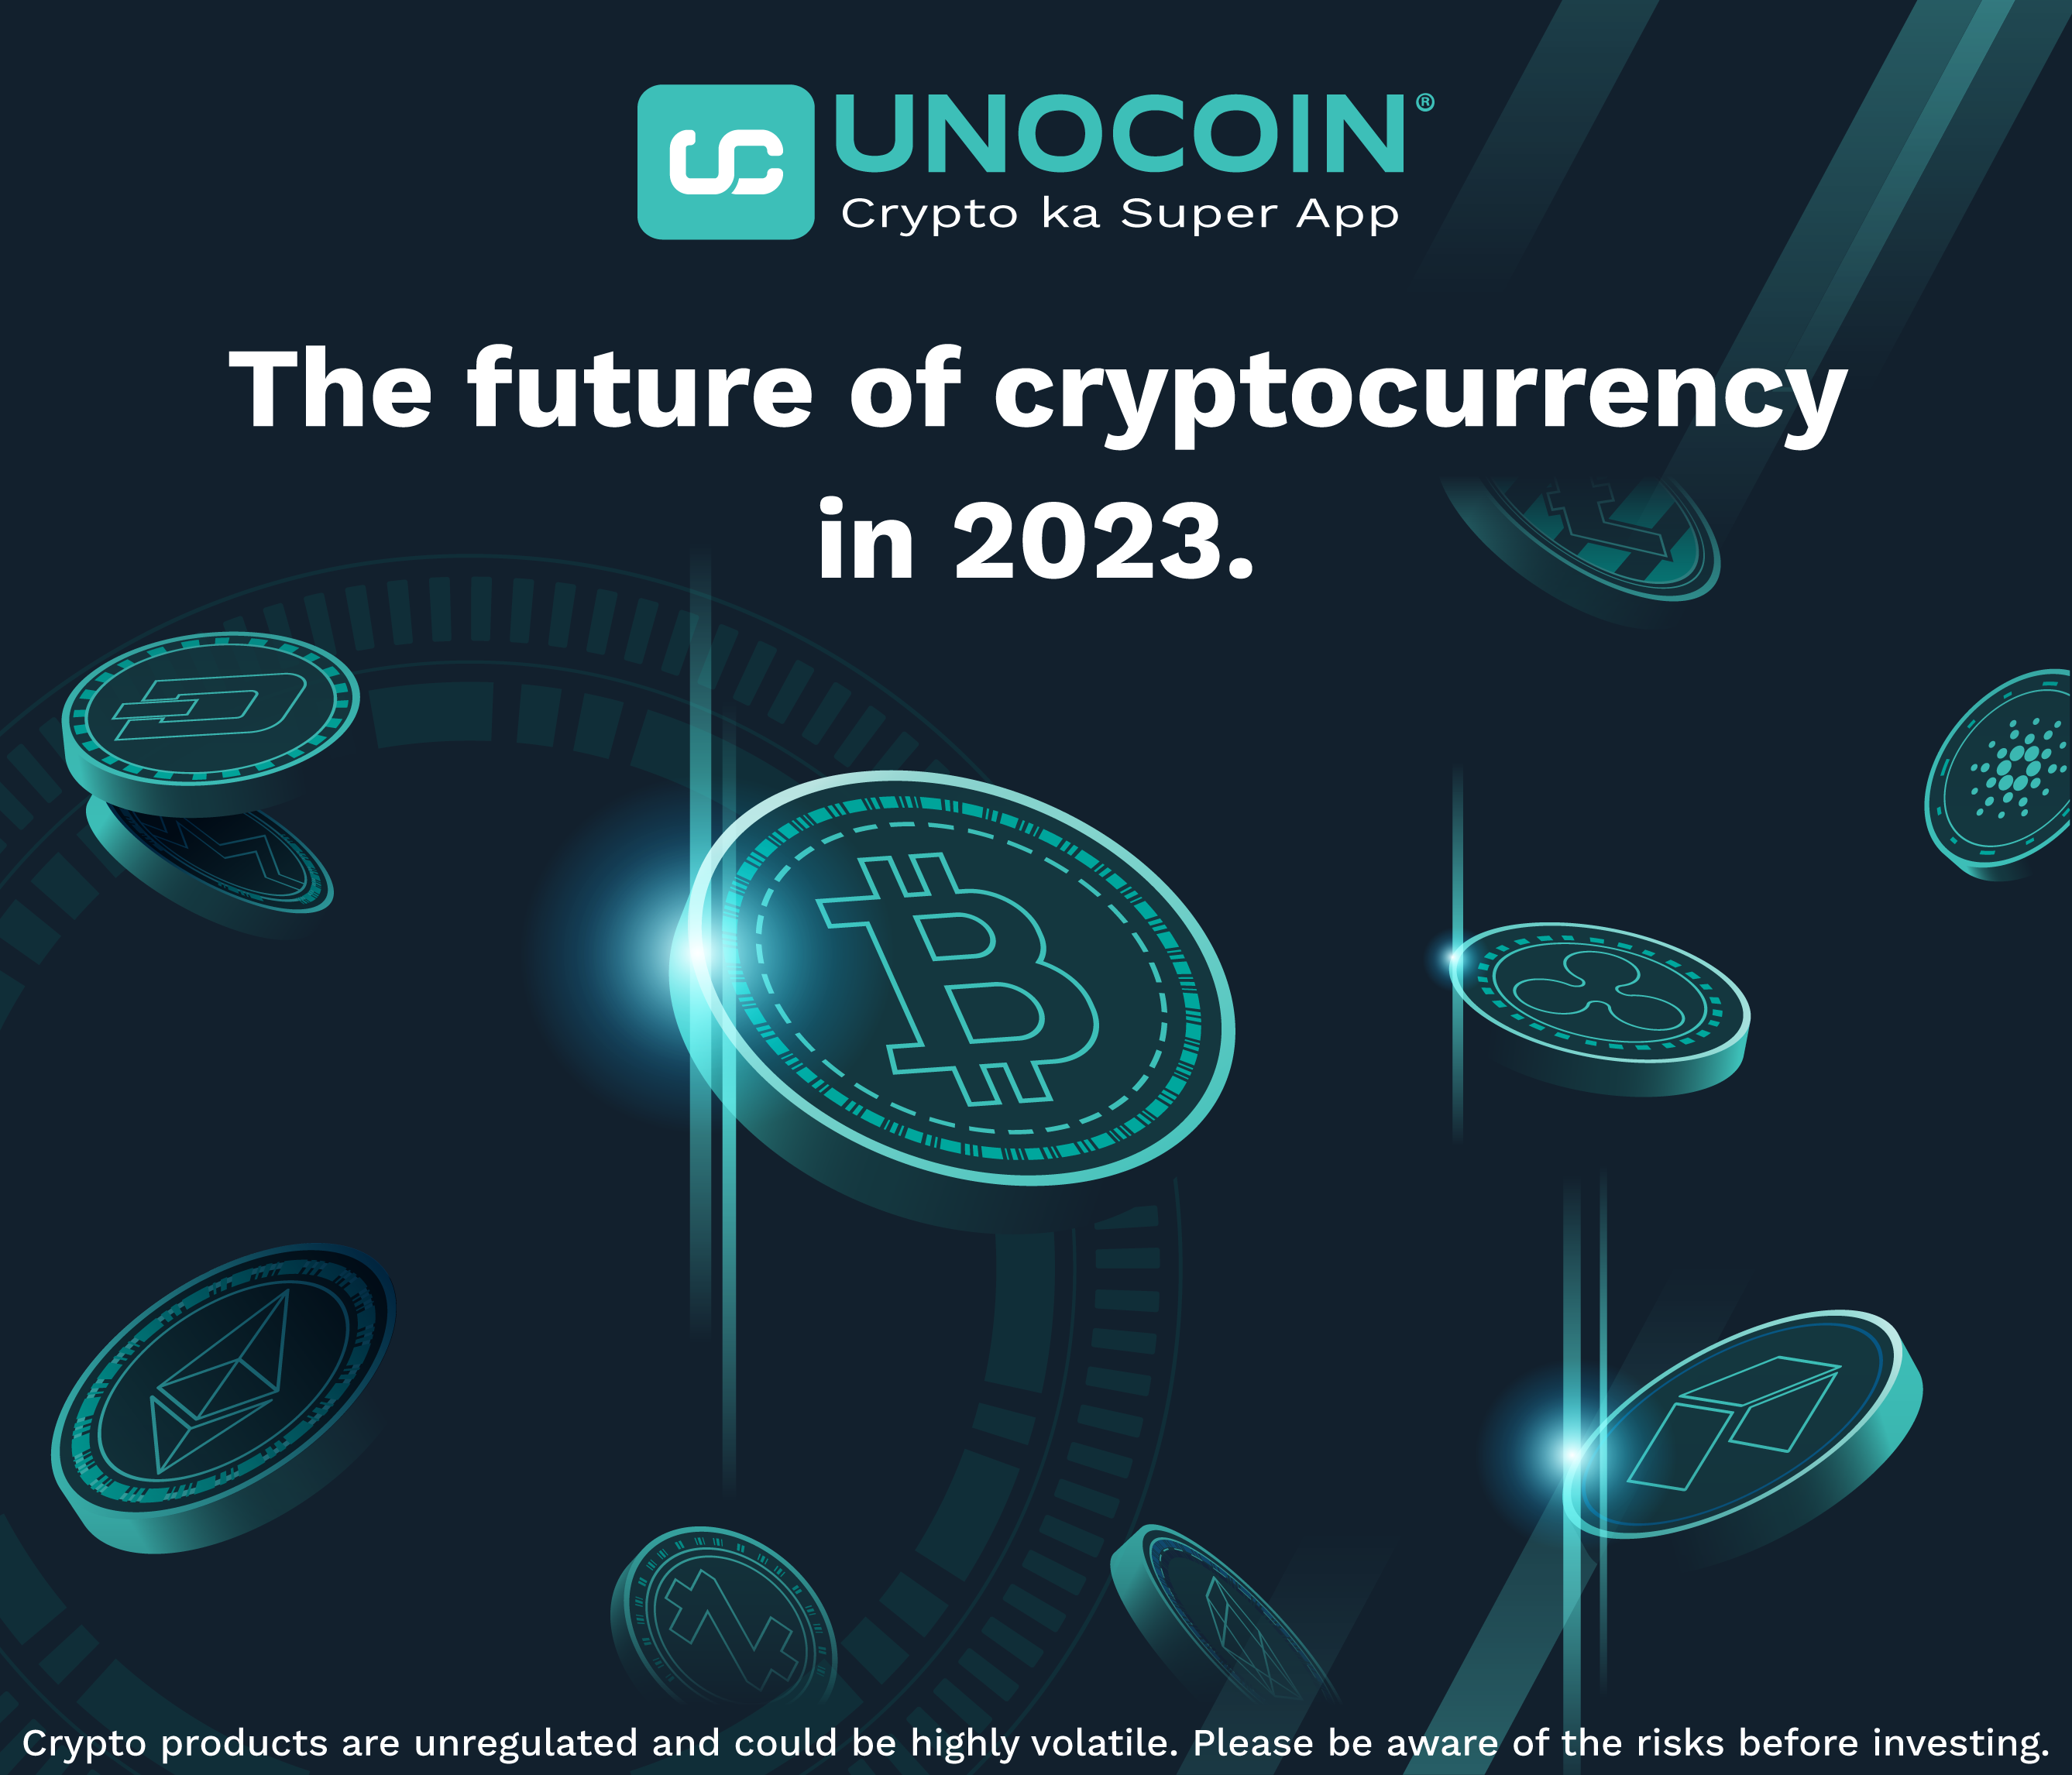 bcn cryptocurrency future